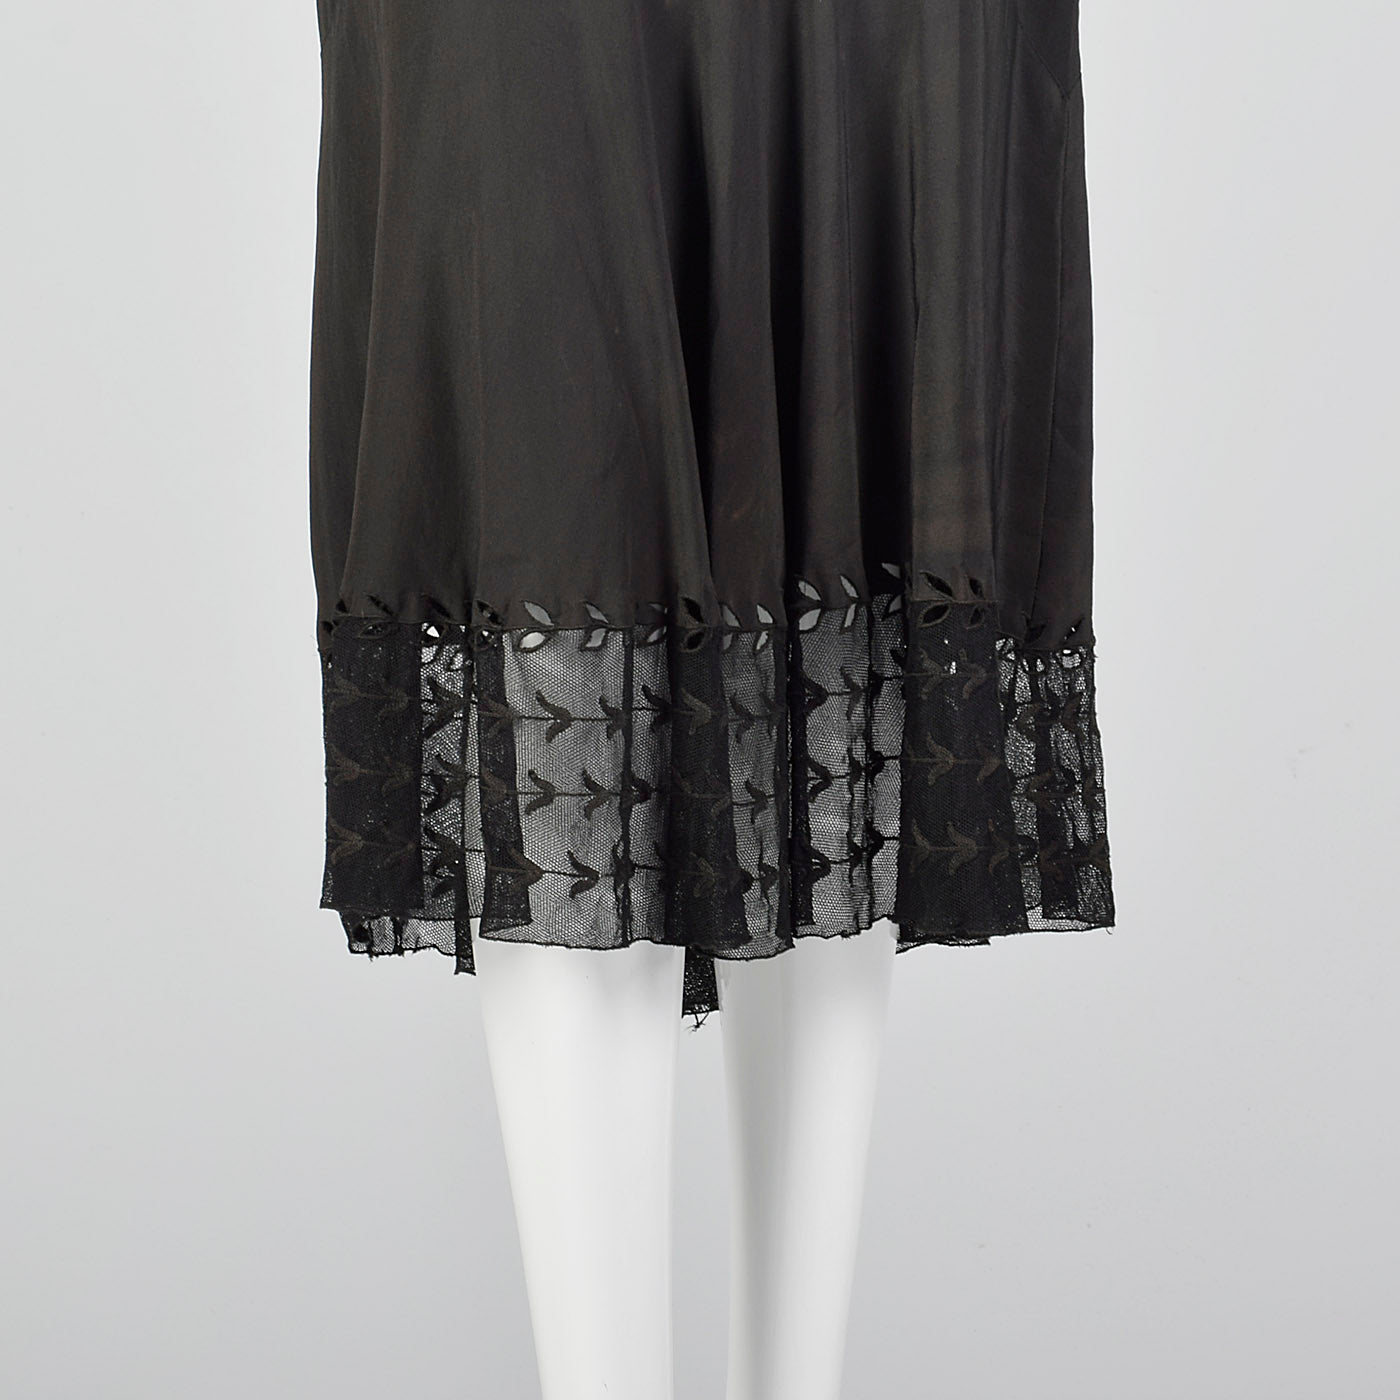 1930s Black Dress with Sheer Trim and Belt